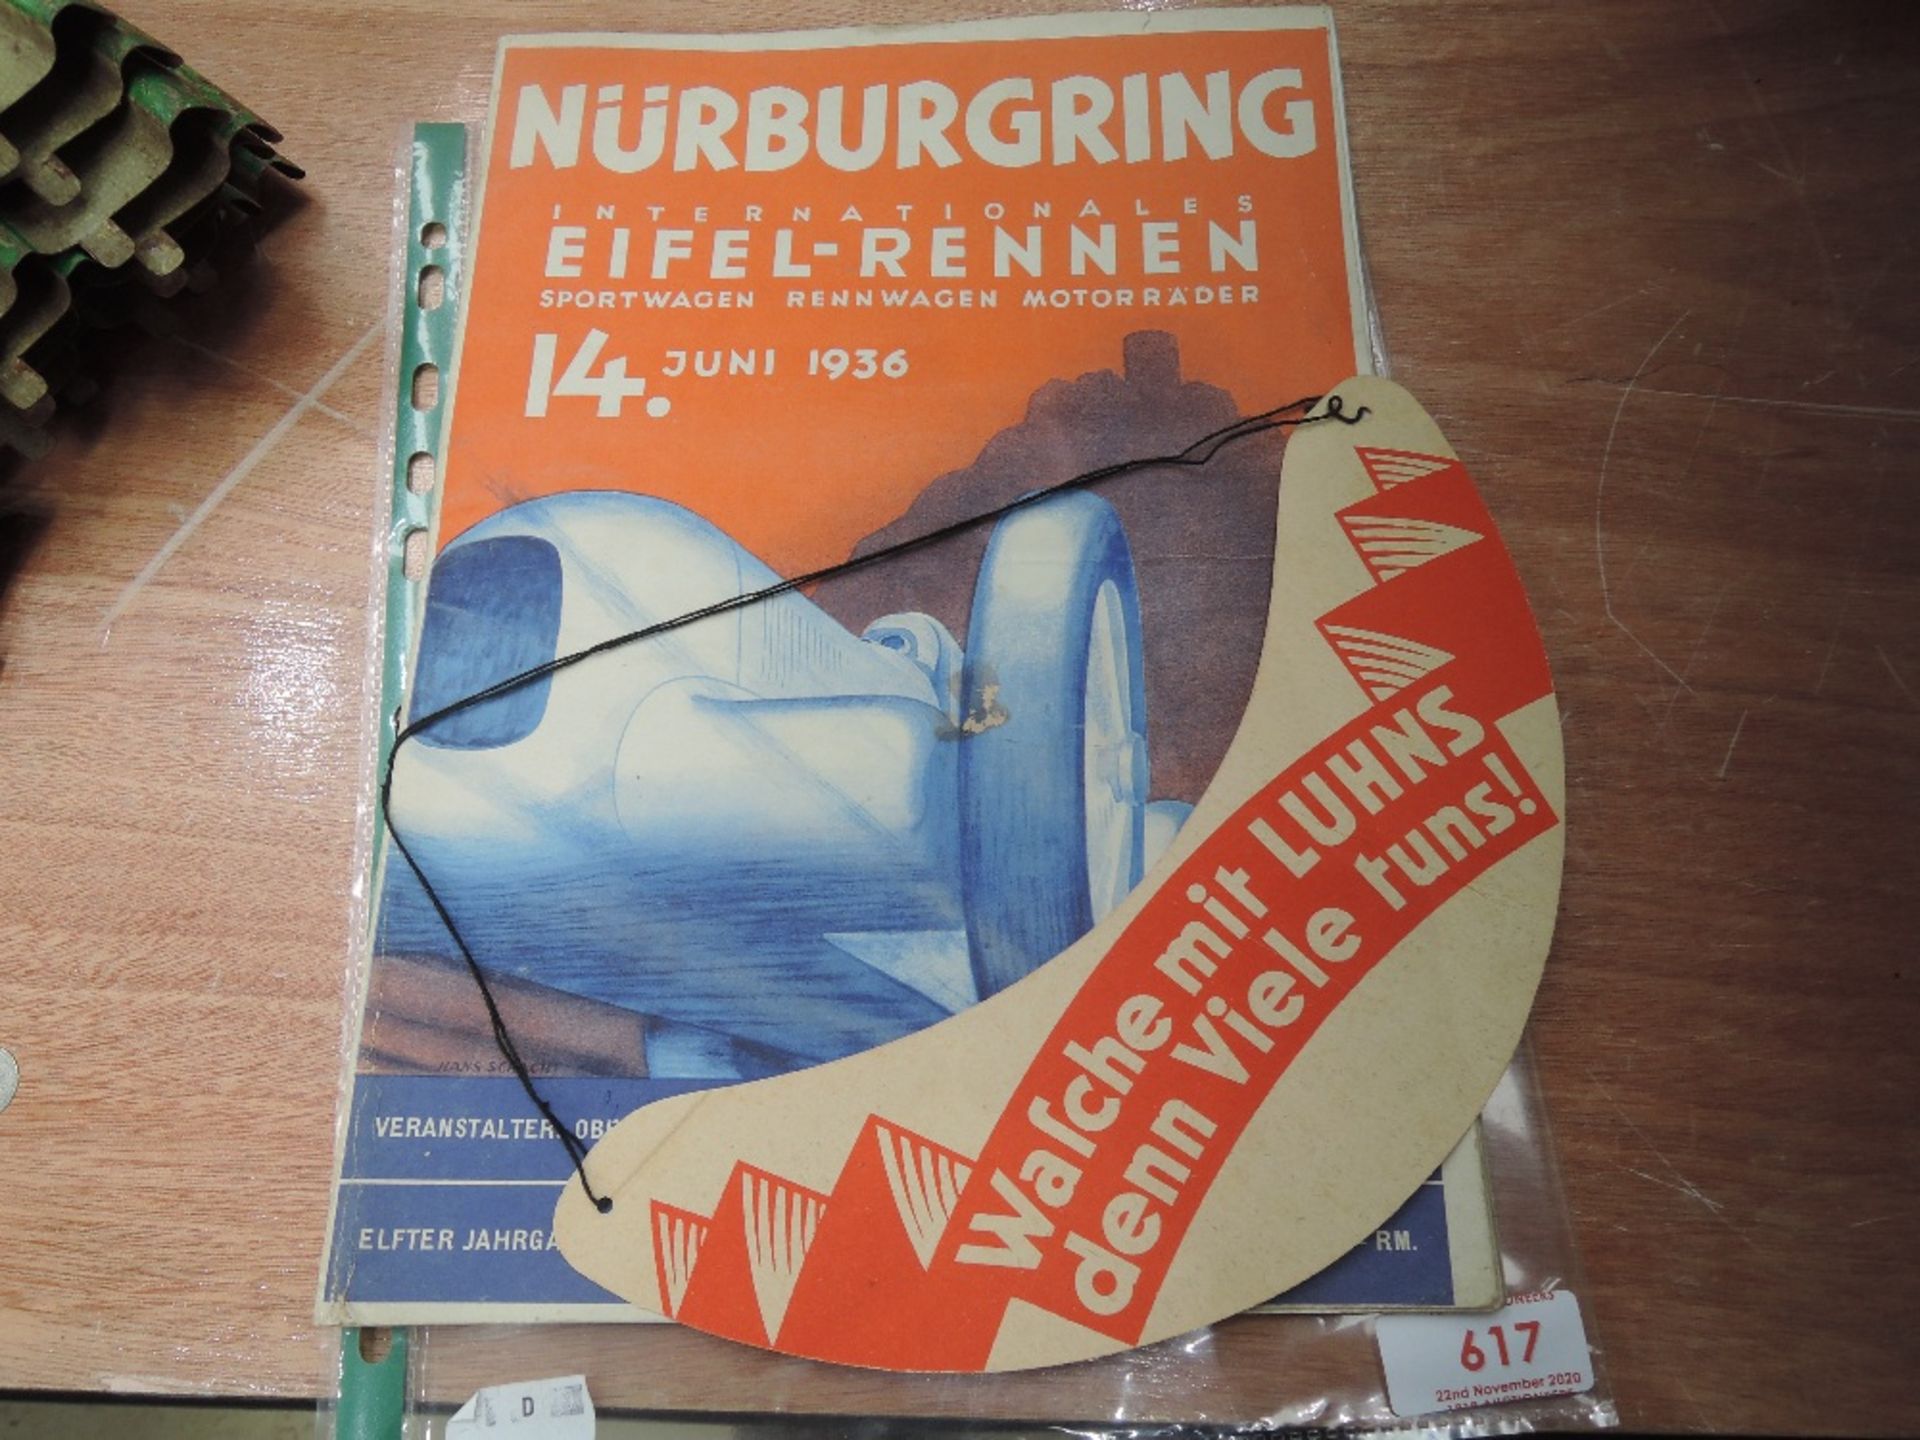 A Race programme for June 1936 Nurburgring with sought after original insert sun visor.